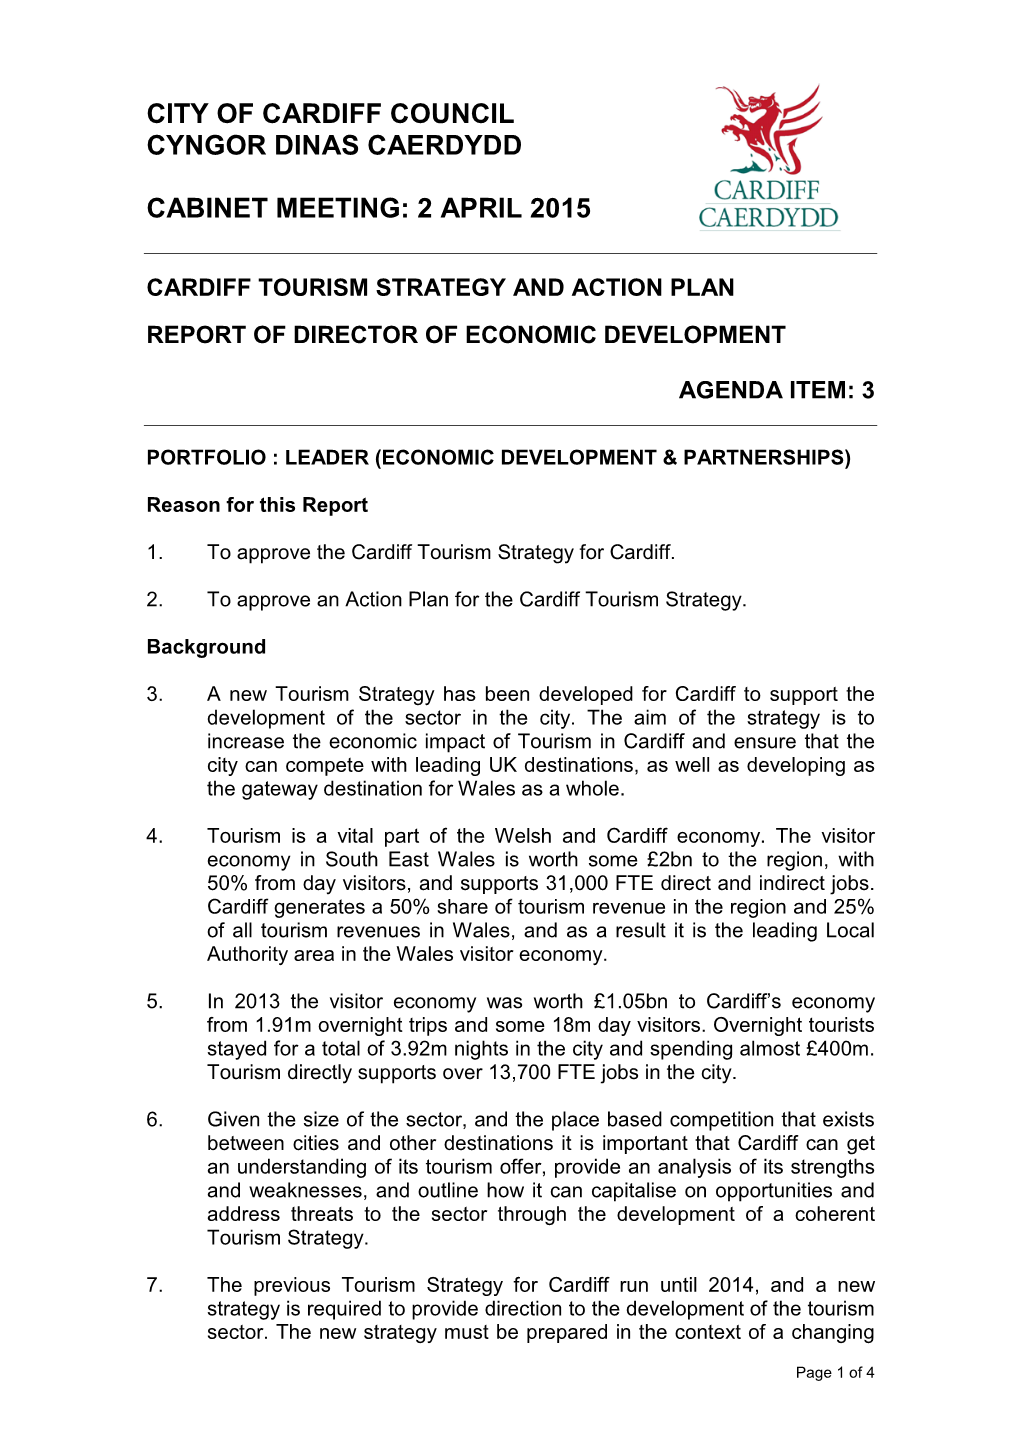 Cardiff Tourism Strategy and Action Plan